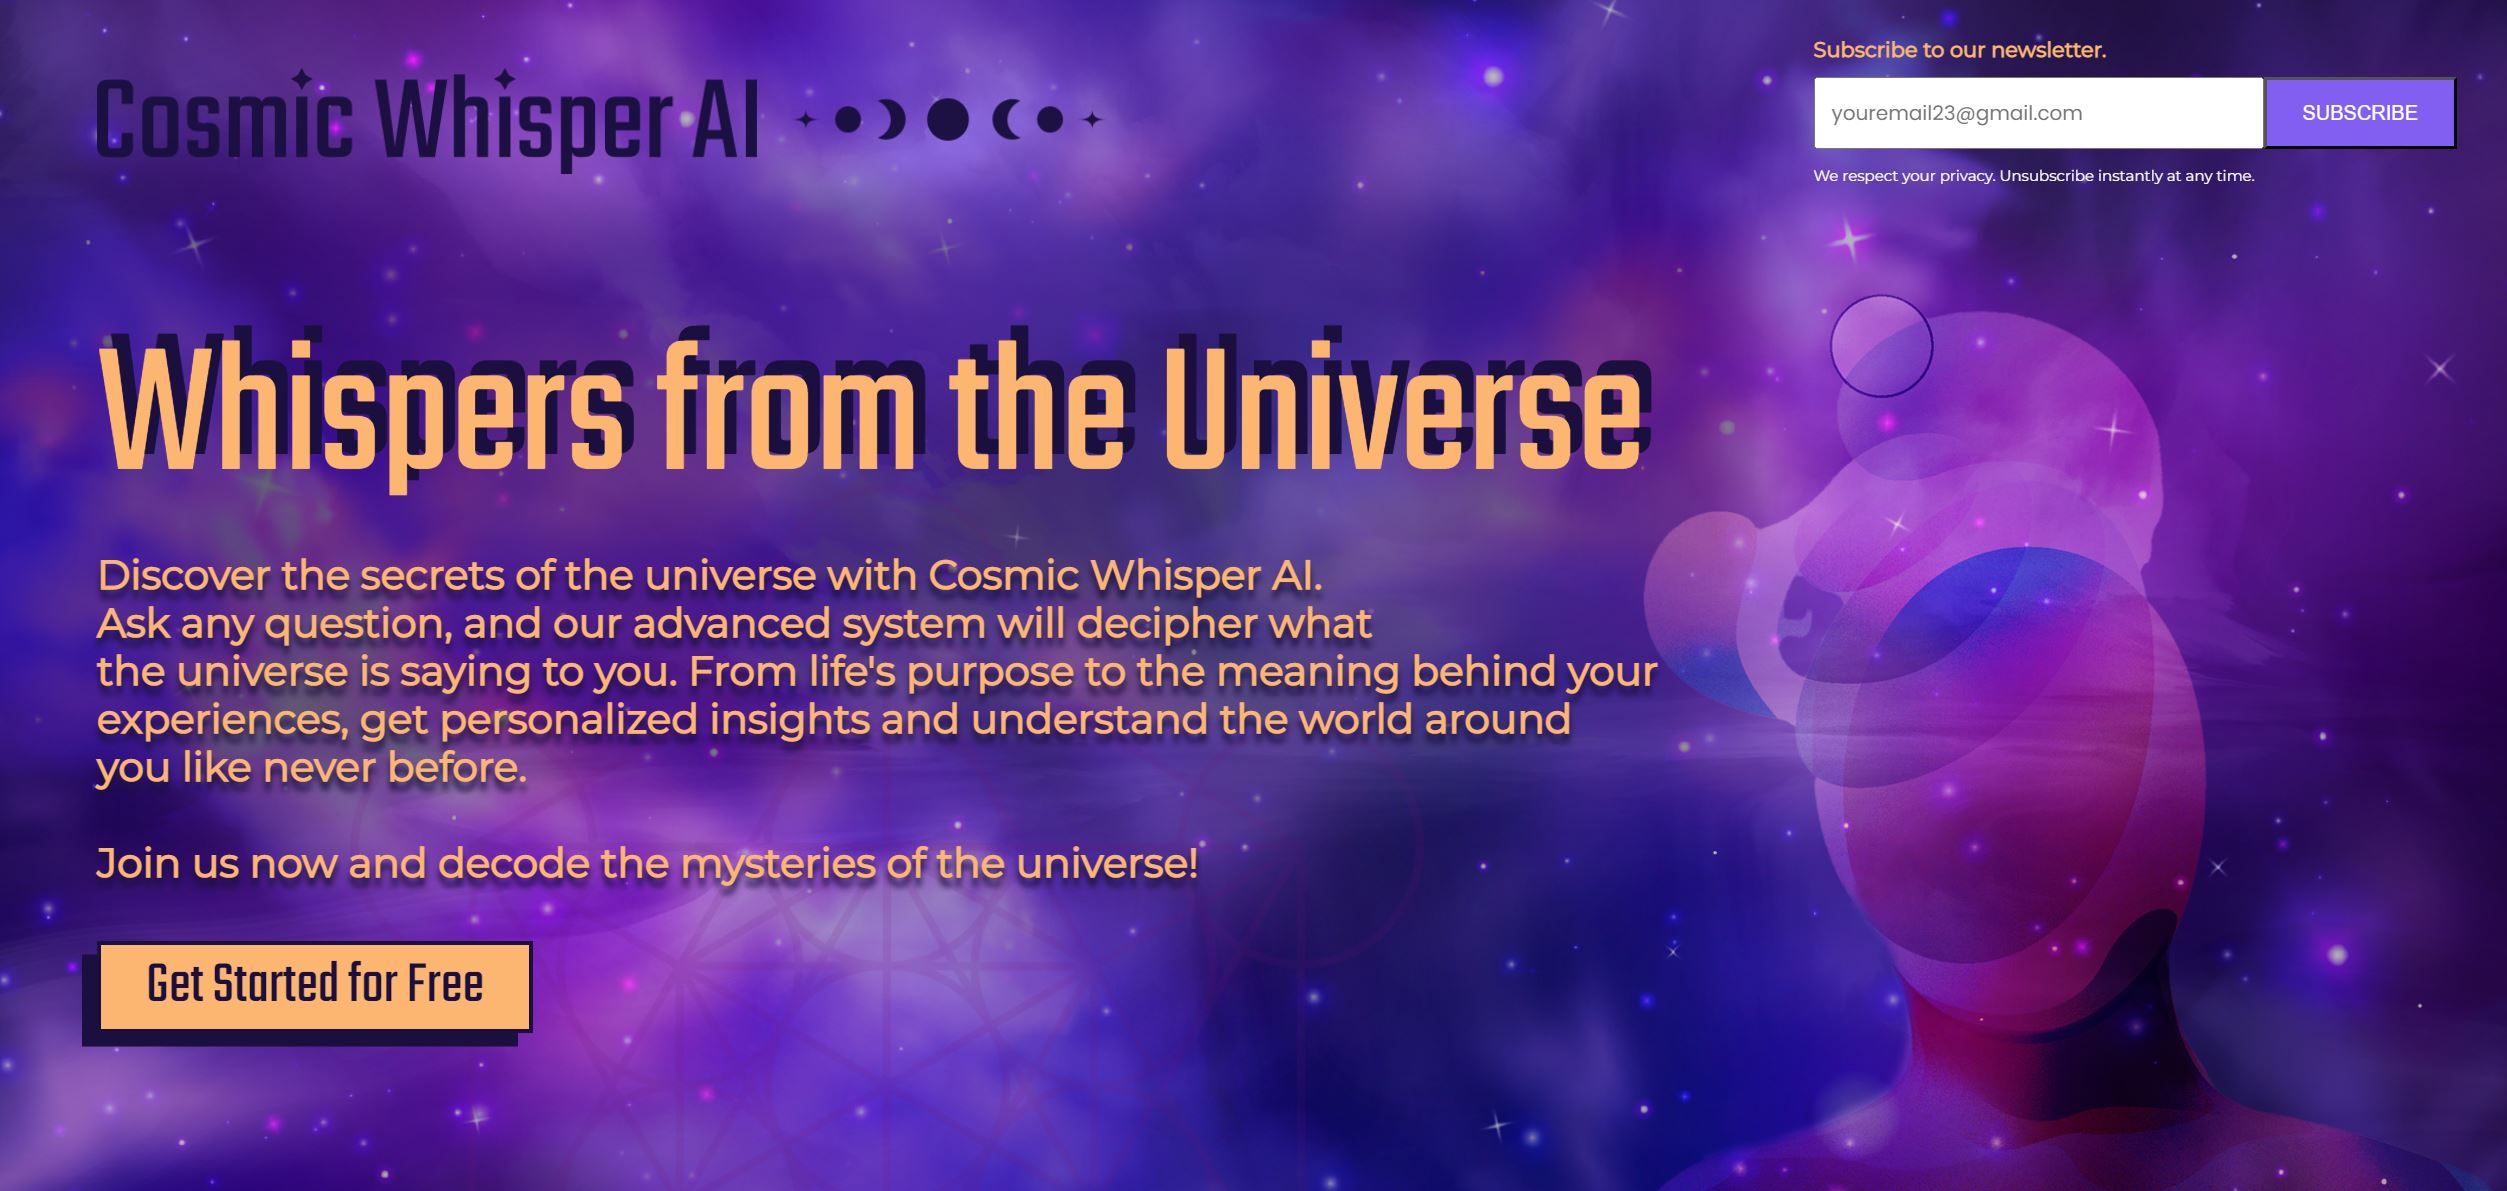  Discover secrets of the universe with Cosmic